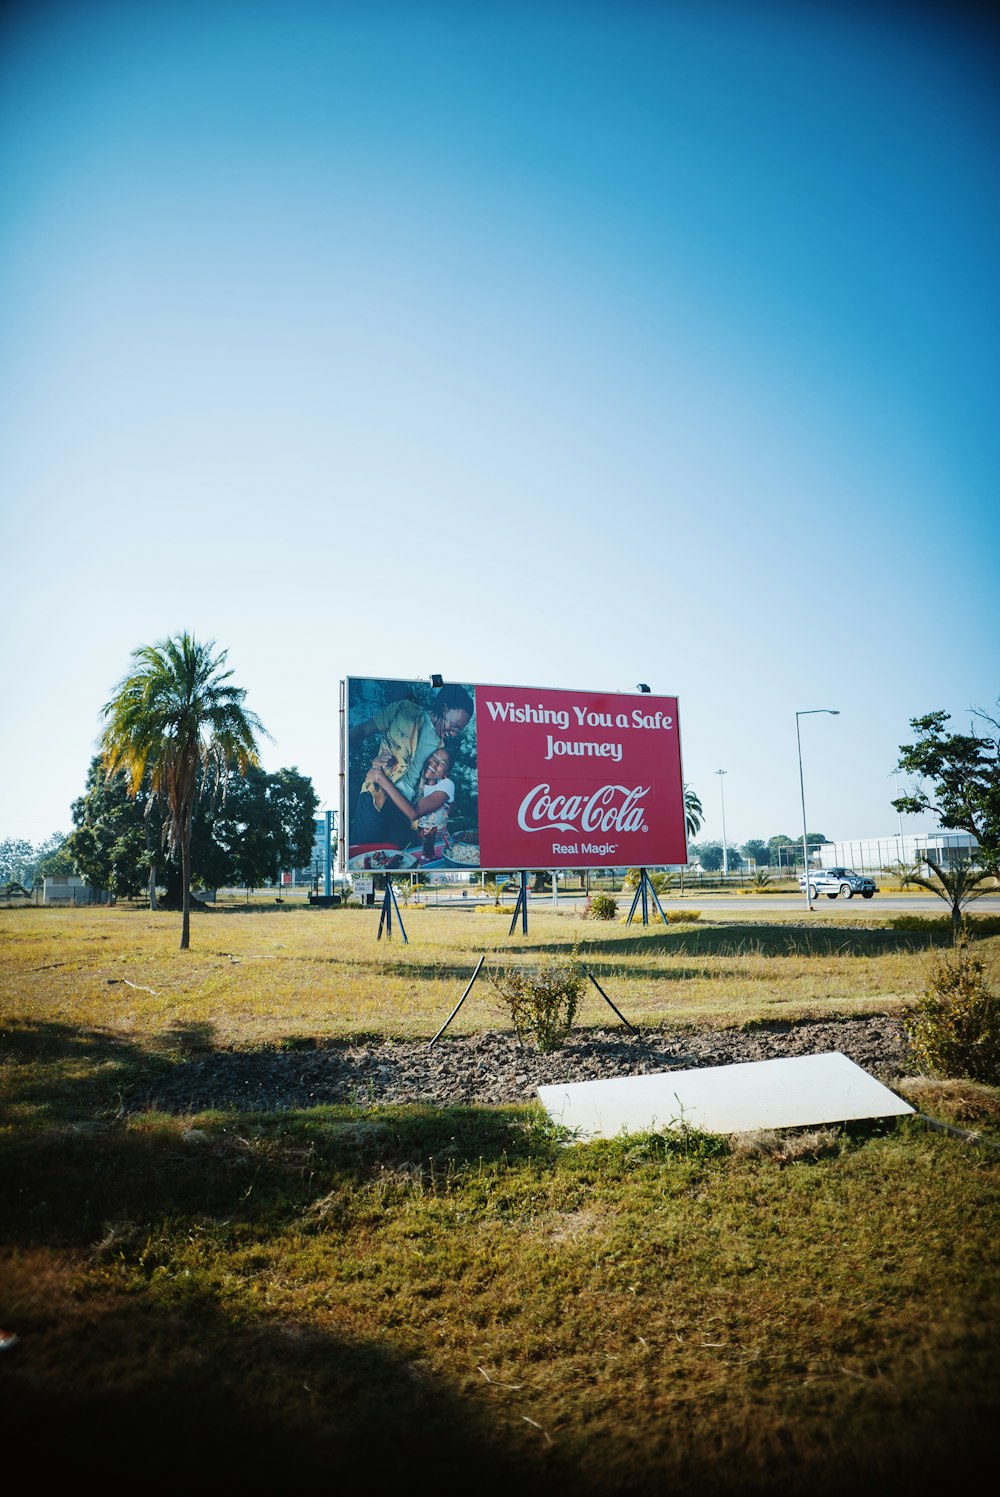 a coca - cola advertisement on a billboard in the middle of a field